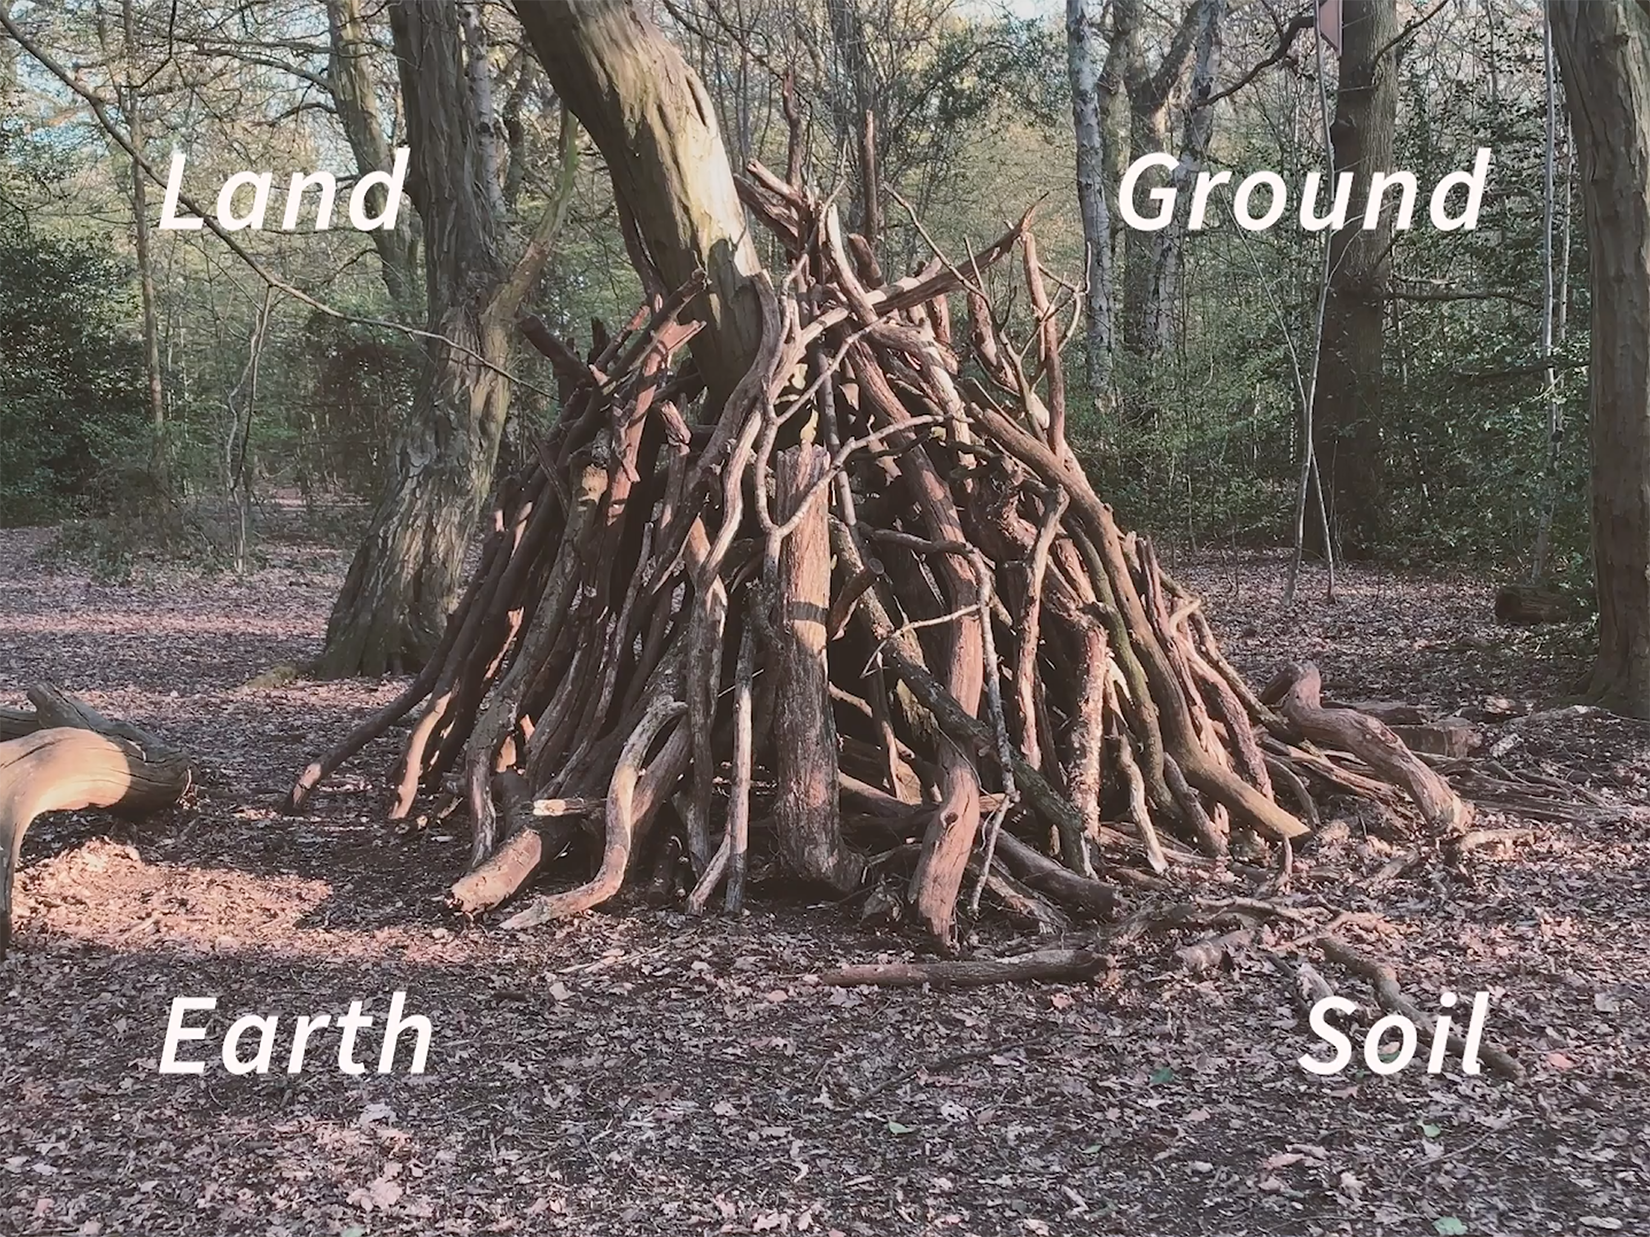 Image of tree with text of Land Ground Earth Soil